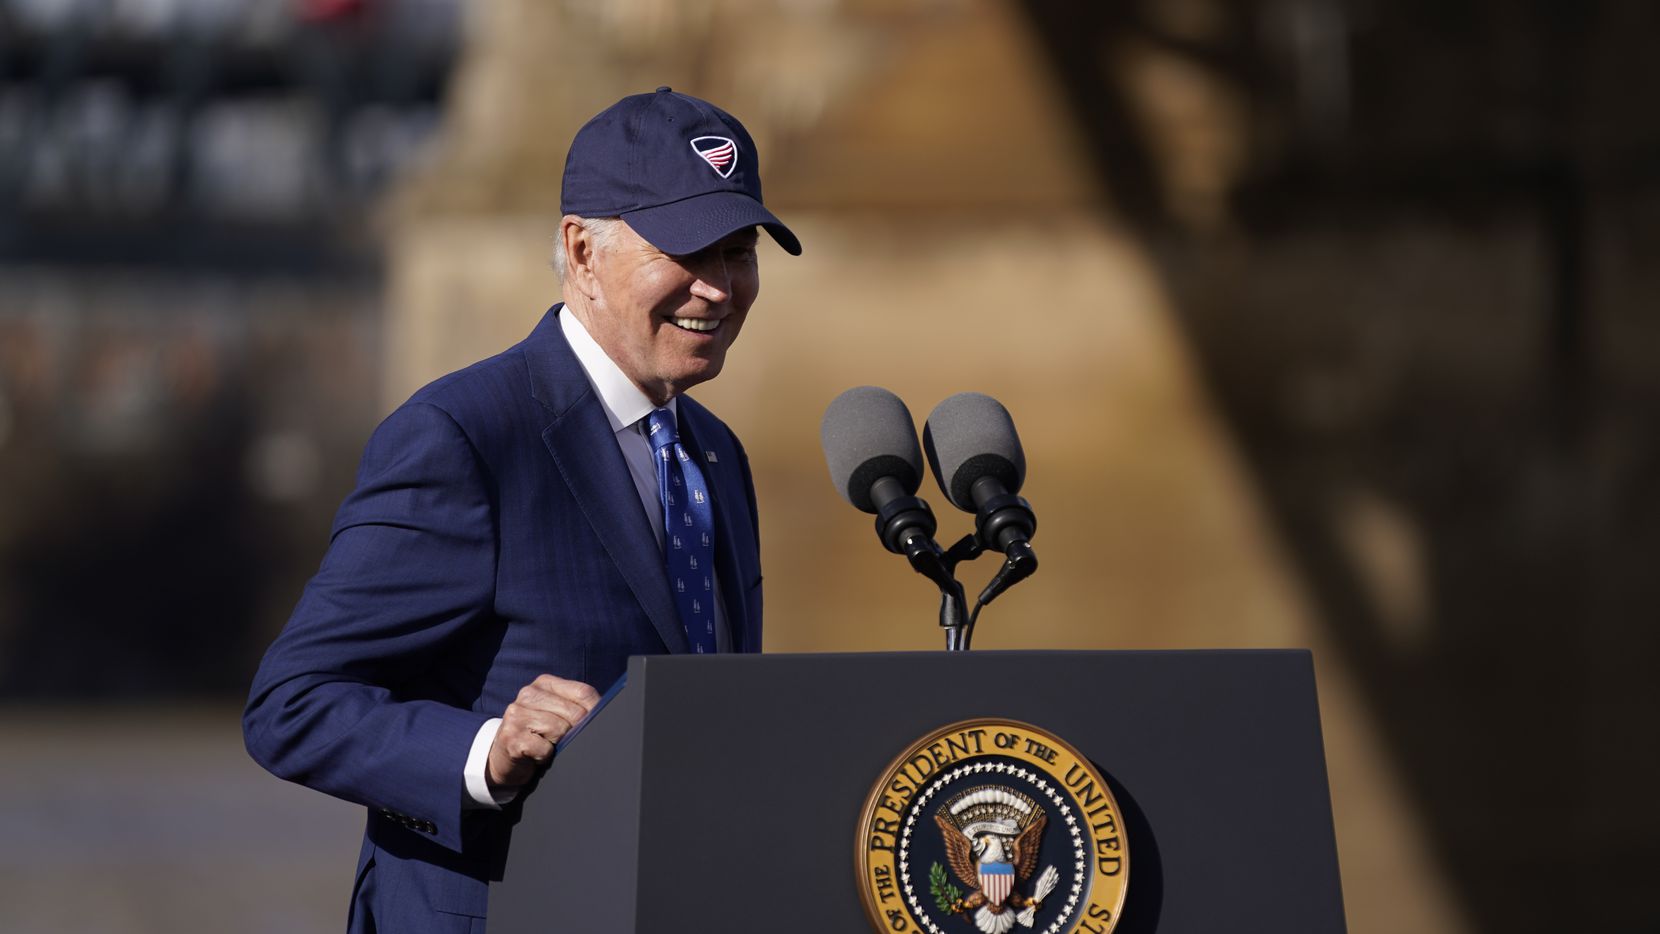 Biden says he intends to visit US-Mexico border